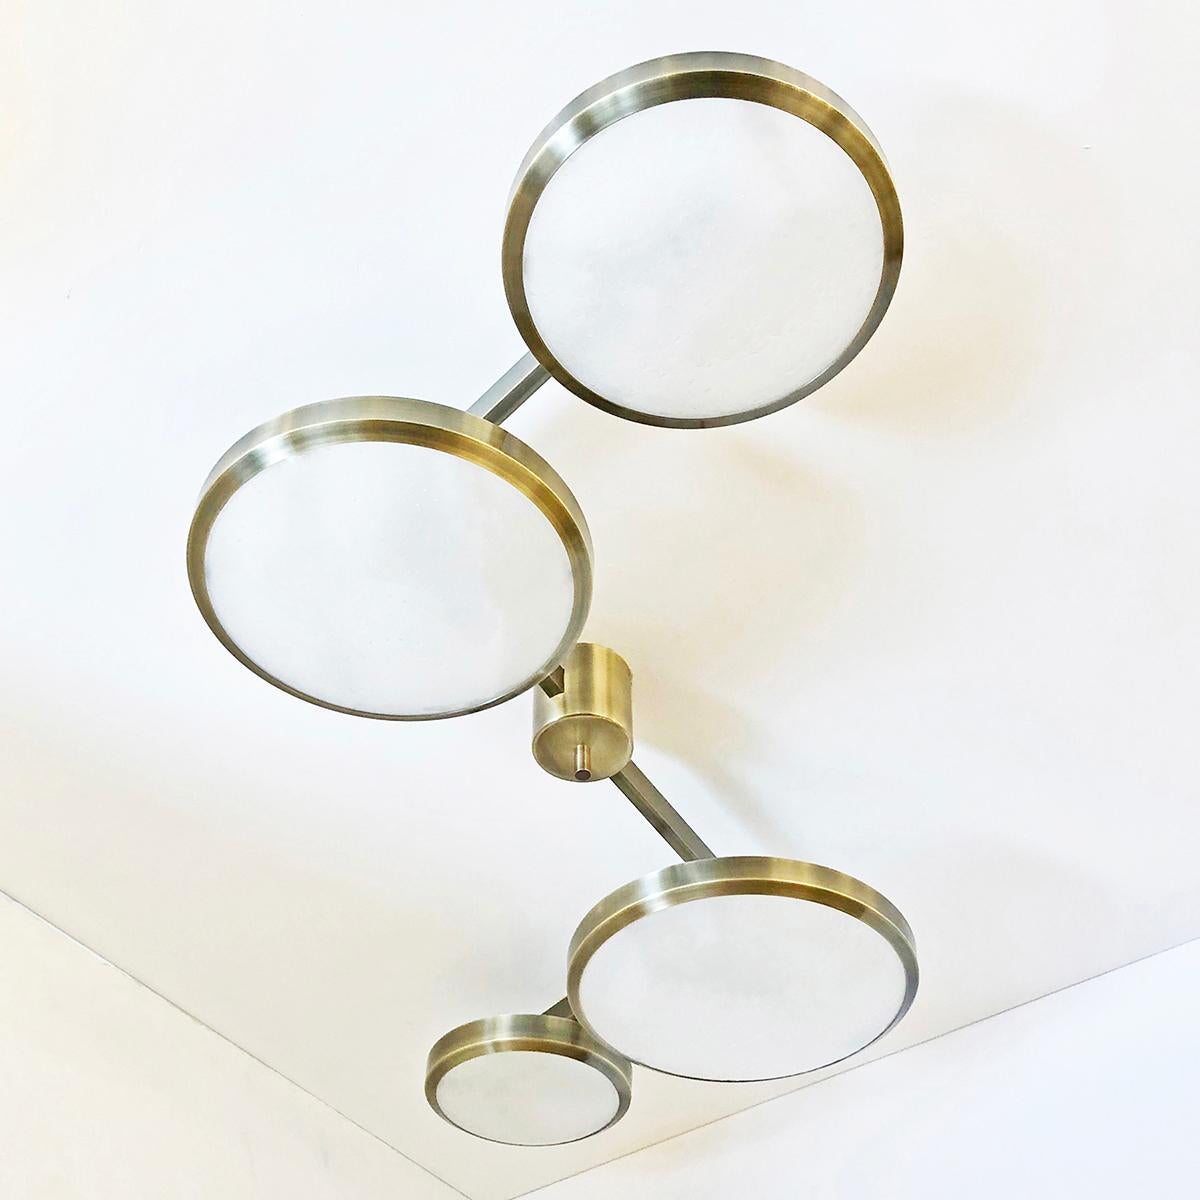 Quattro Ceiling Light by Gaspare Asaro - Polished Brass Finish In New Condition For Sale In New York, NY